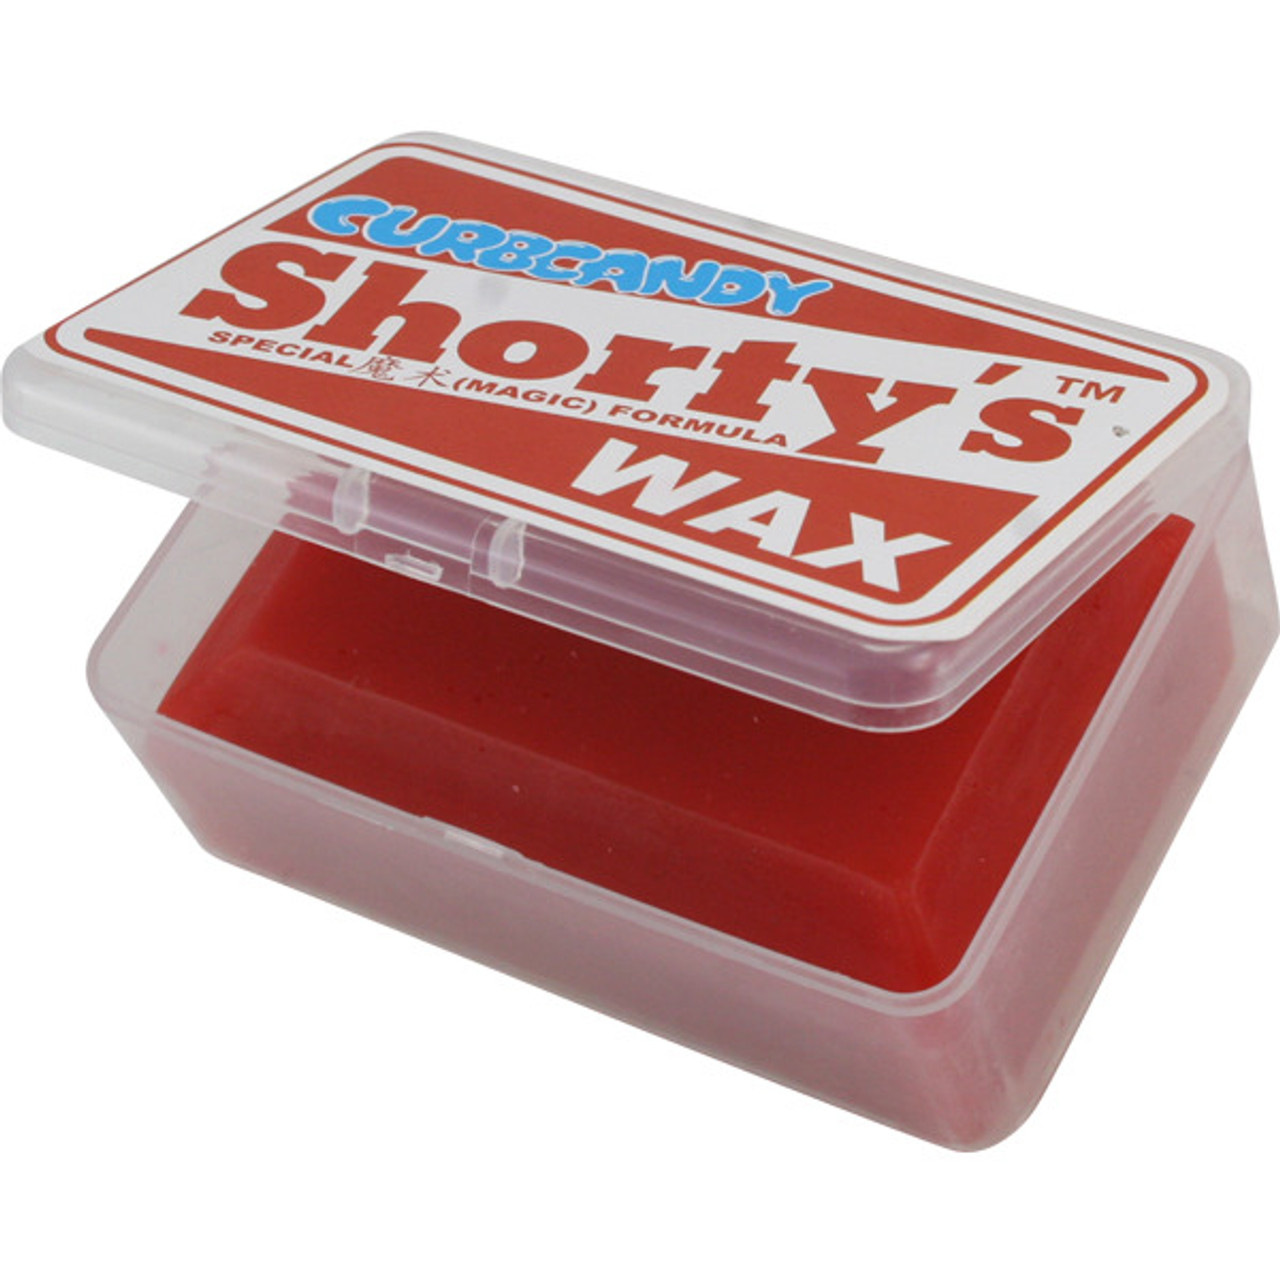 Shortys Curb Candy Wax Red Large Bar